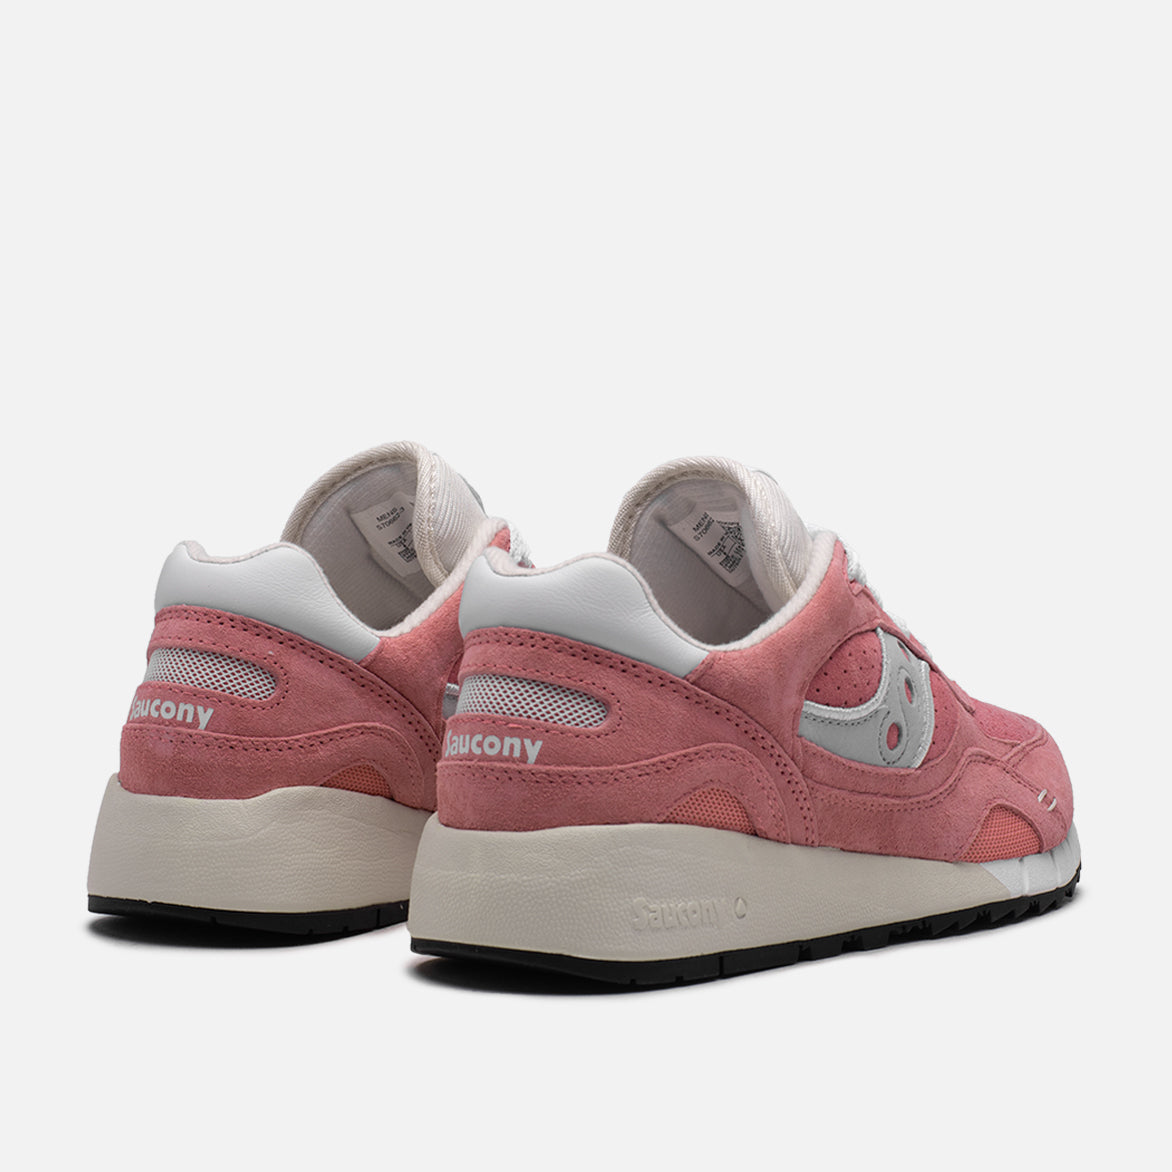 SHADOW 6000 FULL SUEDE - SALMON